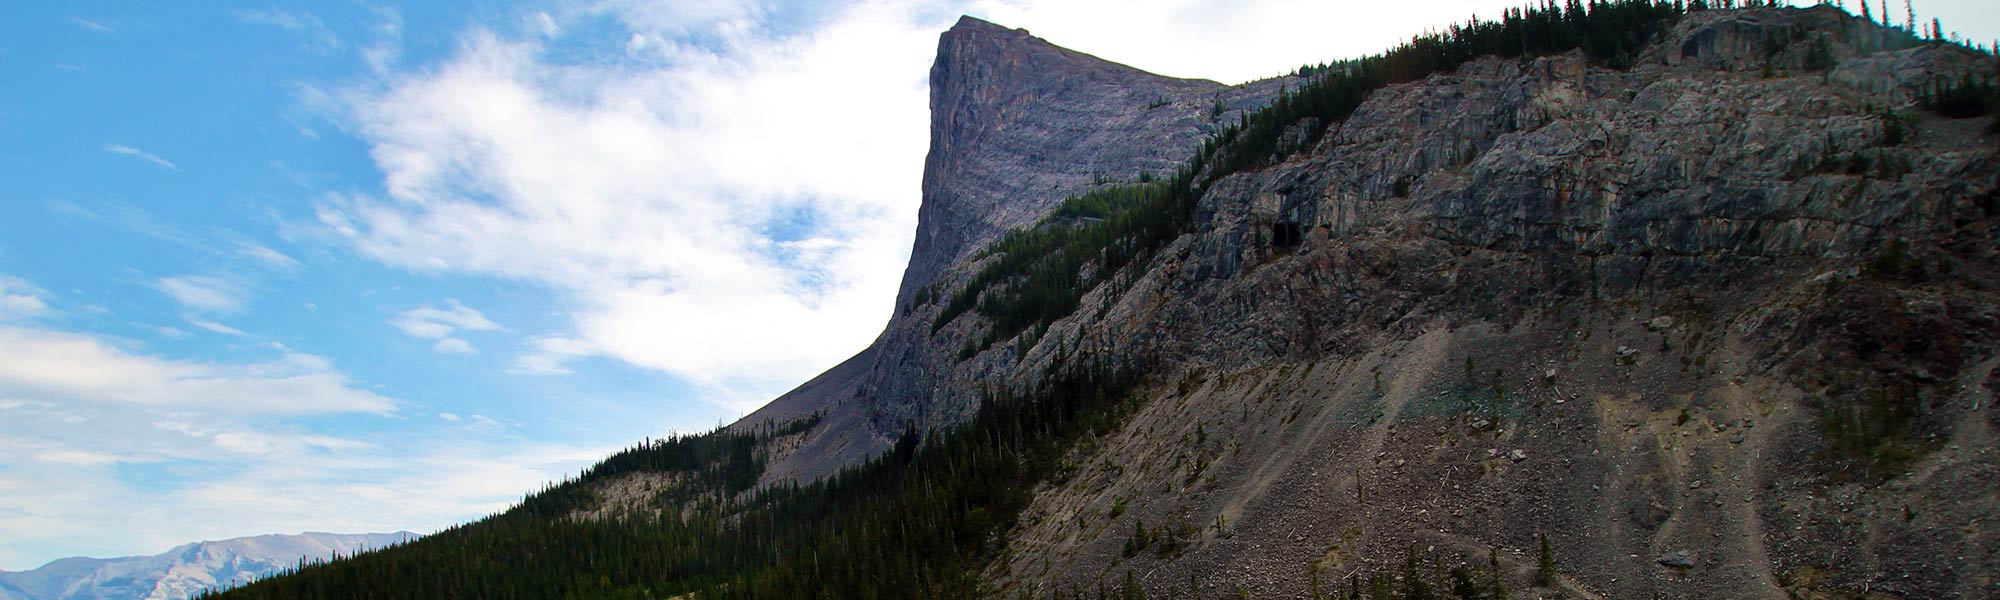 At the base of Ha Ling Peak, one of many mountins near Canmore, Alberta